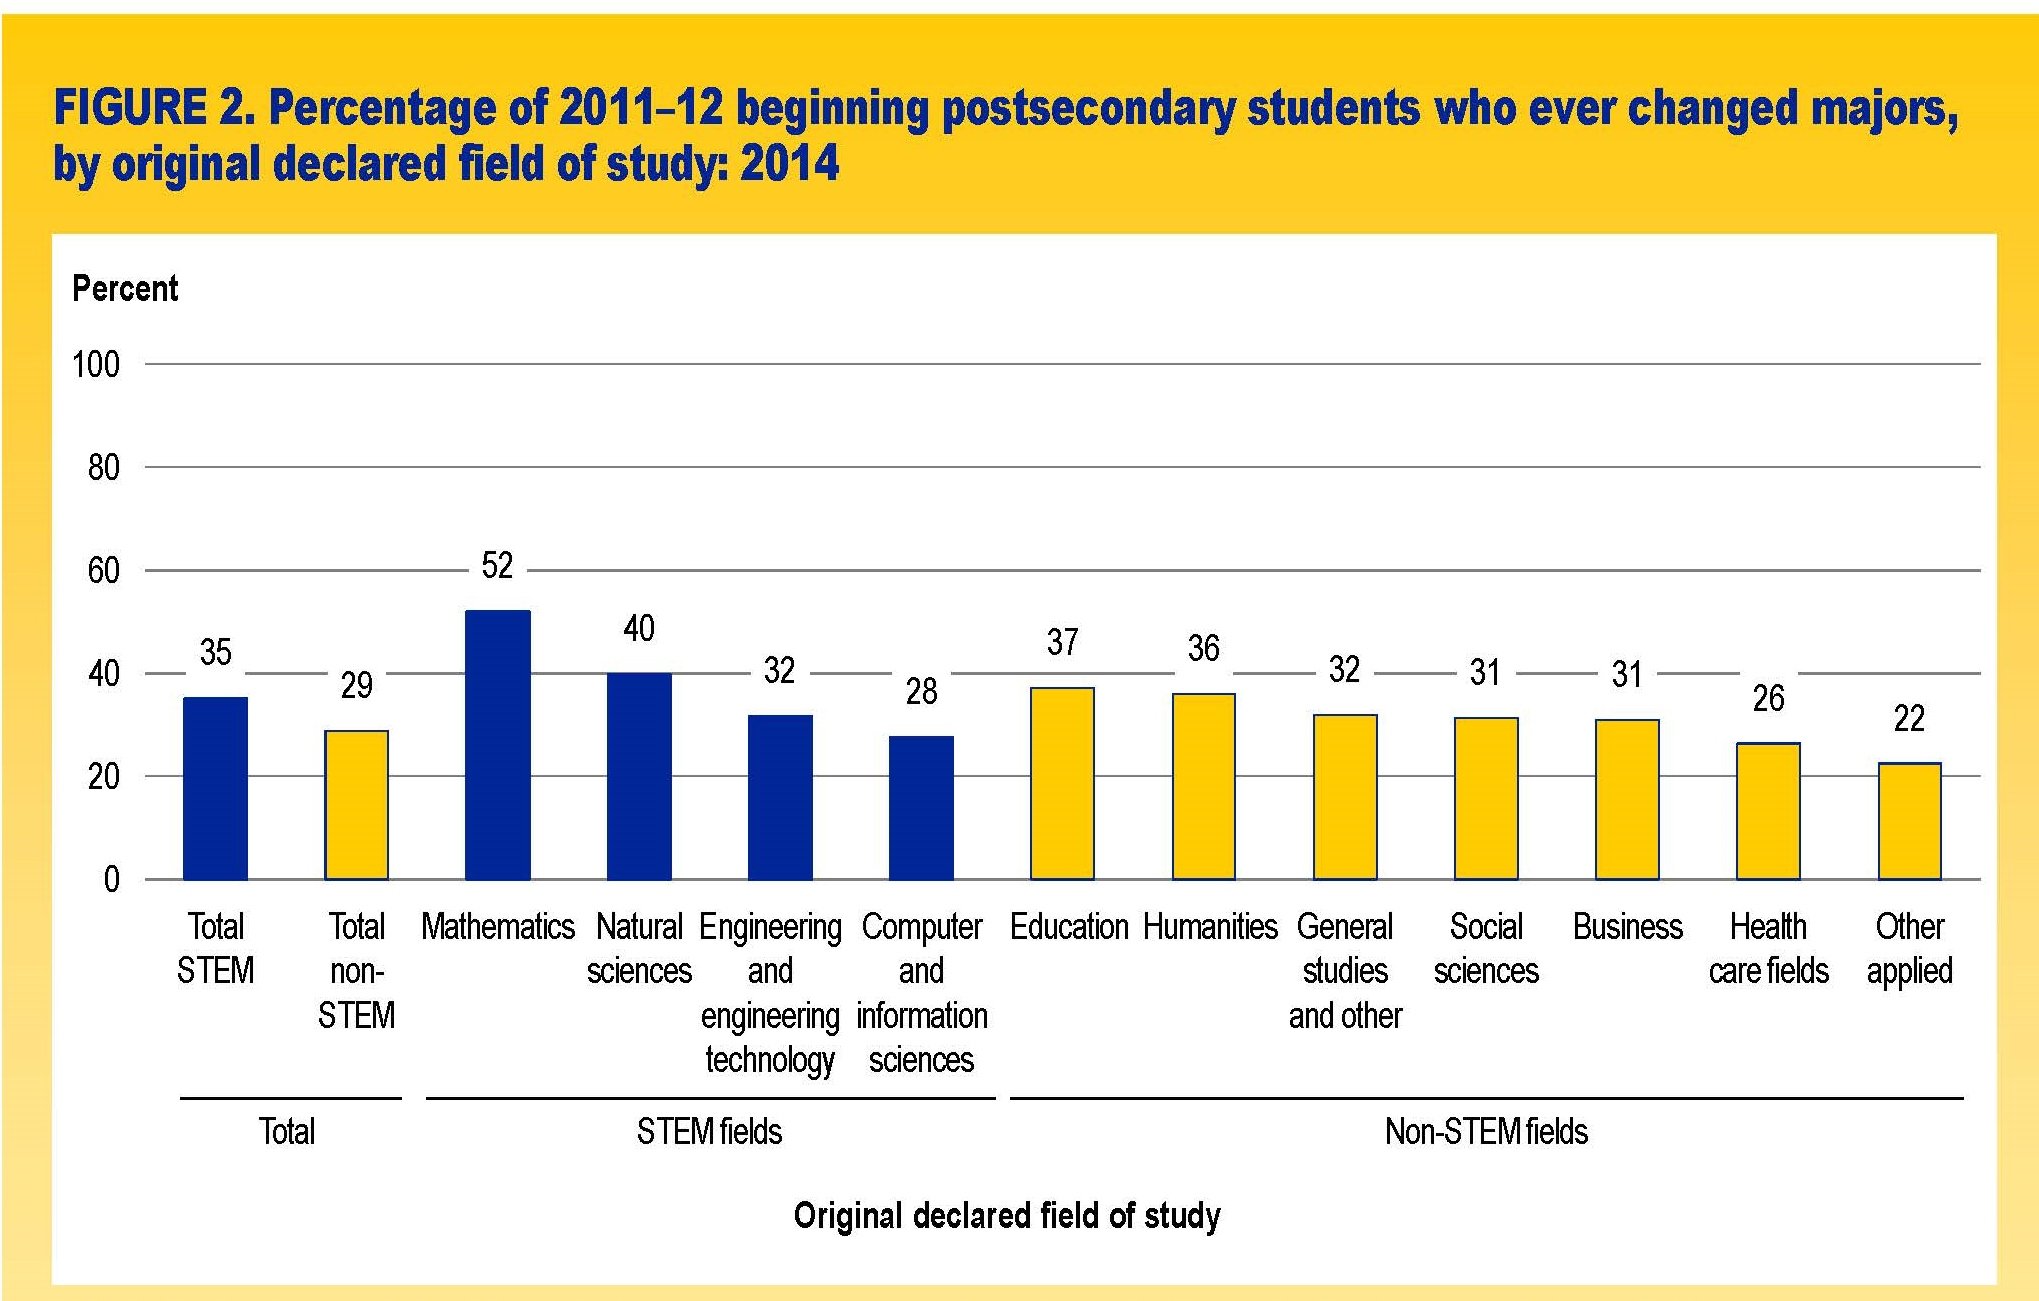 Figure 2. Percentage of 2011-12 beginning postsecondary students who ever changed majors, by original declared field of study: 2014. Bar chart shows 35 percent of total STEM majors changed majors, as did 29 percent of total non-STEM majors. Mathematics: 52 percent. Natural sciences: 40 percent. Engineering and engineering technology: 32 percent. Computer and information sciences: 28 percent. Education: 37 percent. Humanities: 36 percent. General studies and other: 32 percent. Social sciences: 31 percent. Business: 31 percent. Health-care fields: 26 percent. Other applied: 22 percent.